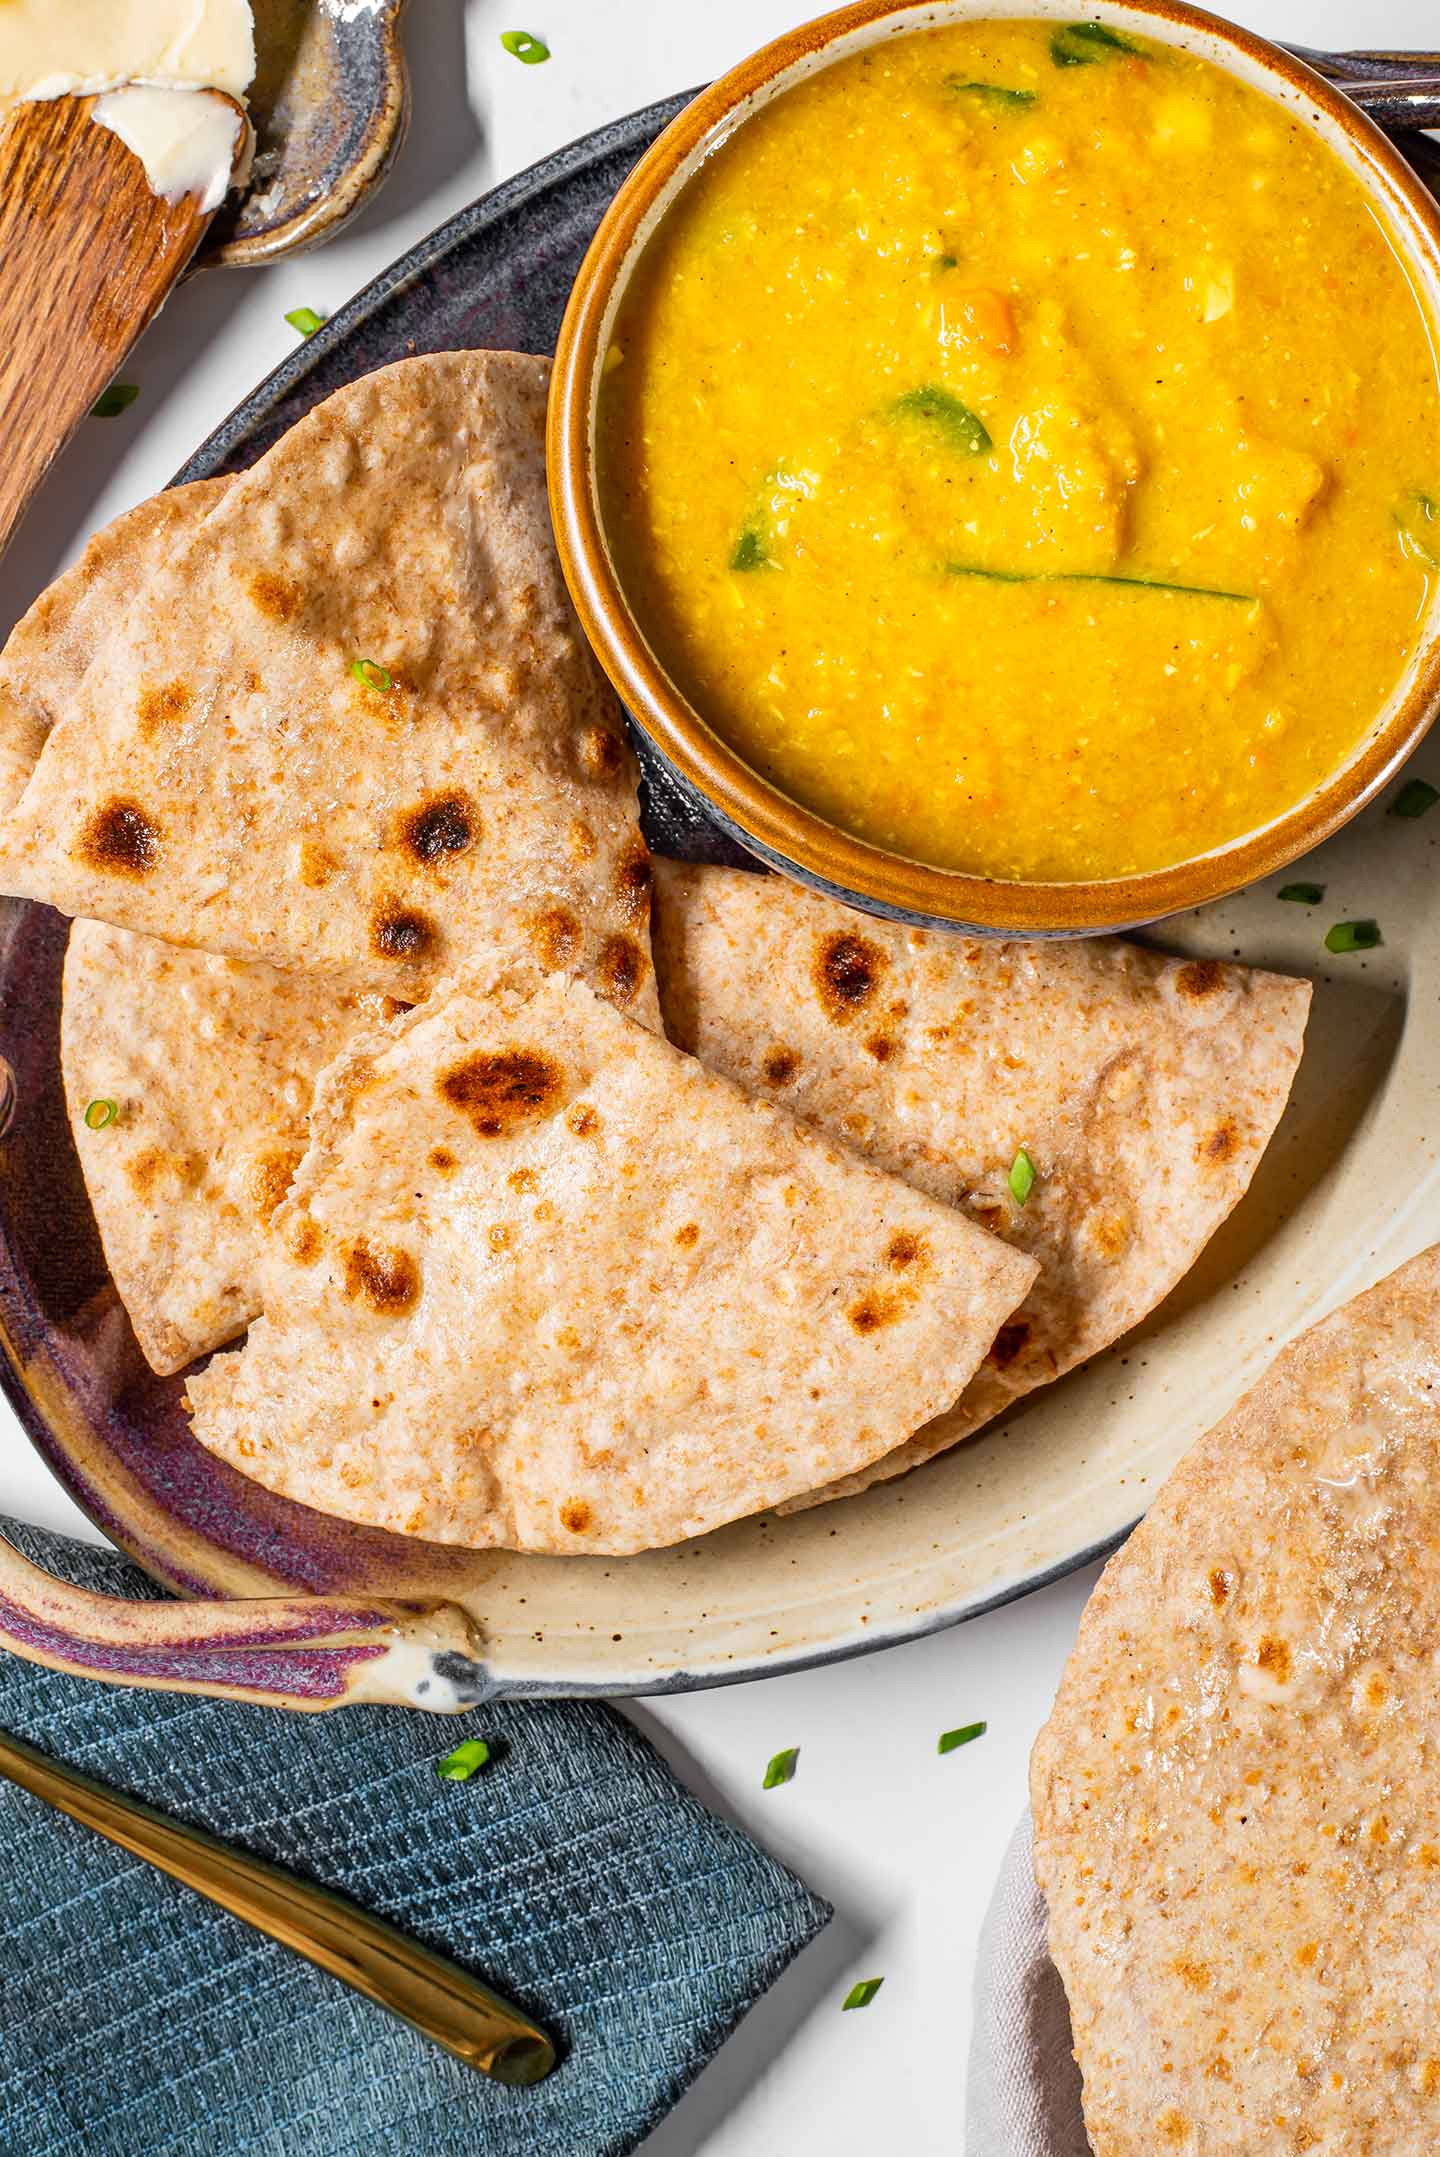 Top down view of roti folded and served alongside a bowl of dal.